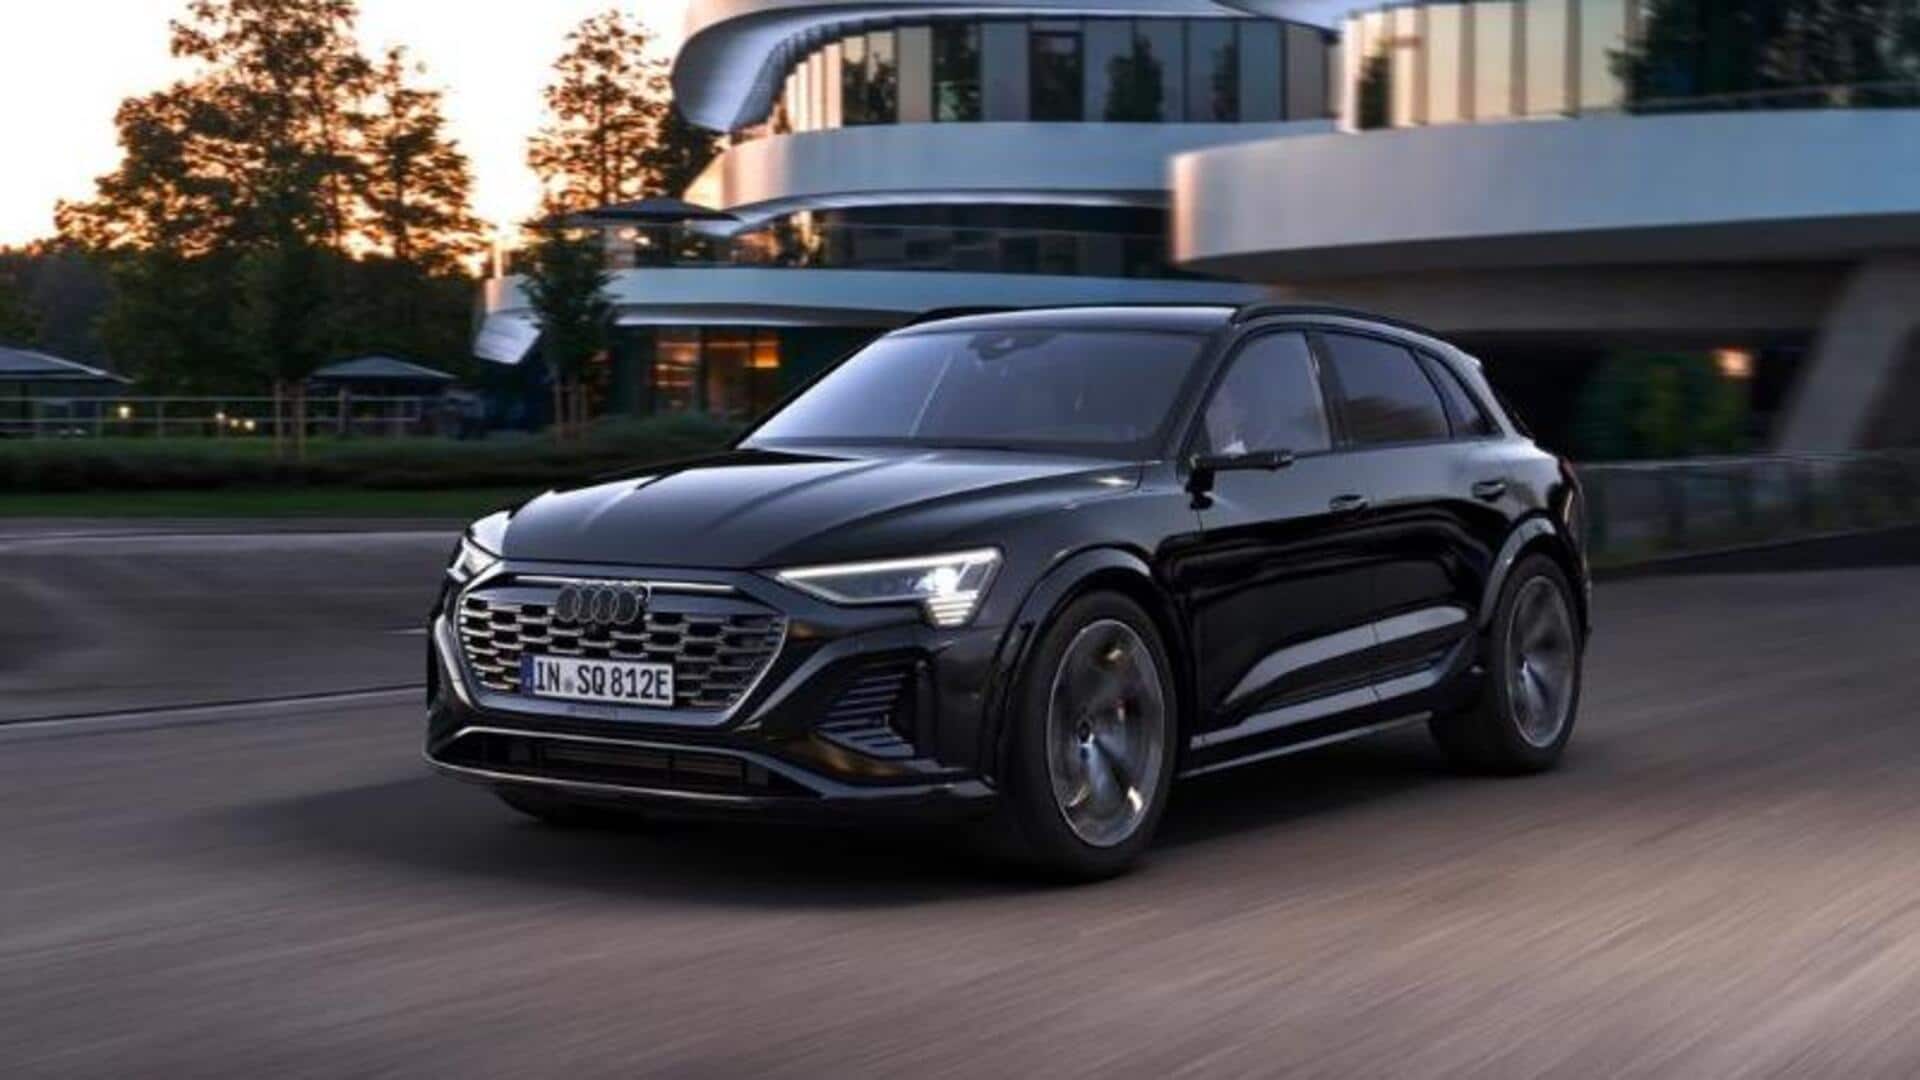 Audi Q8 e-tron SUV, Sportback revealed in India: Check features